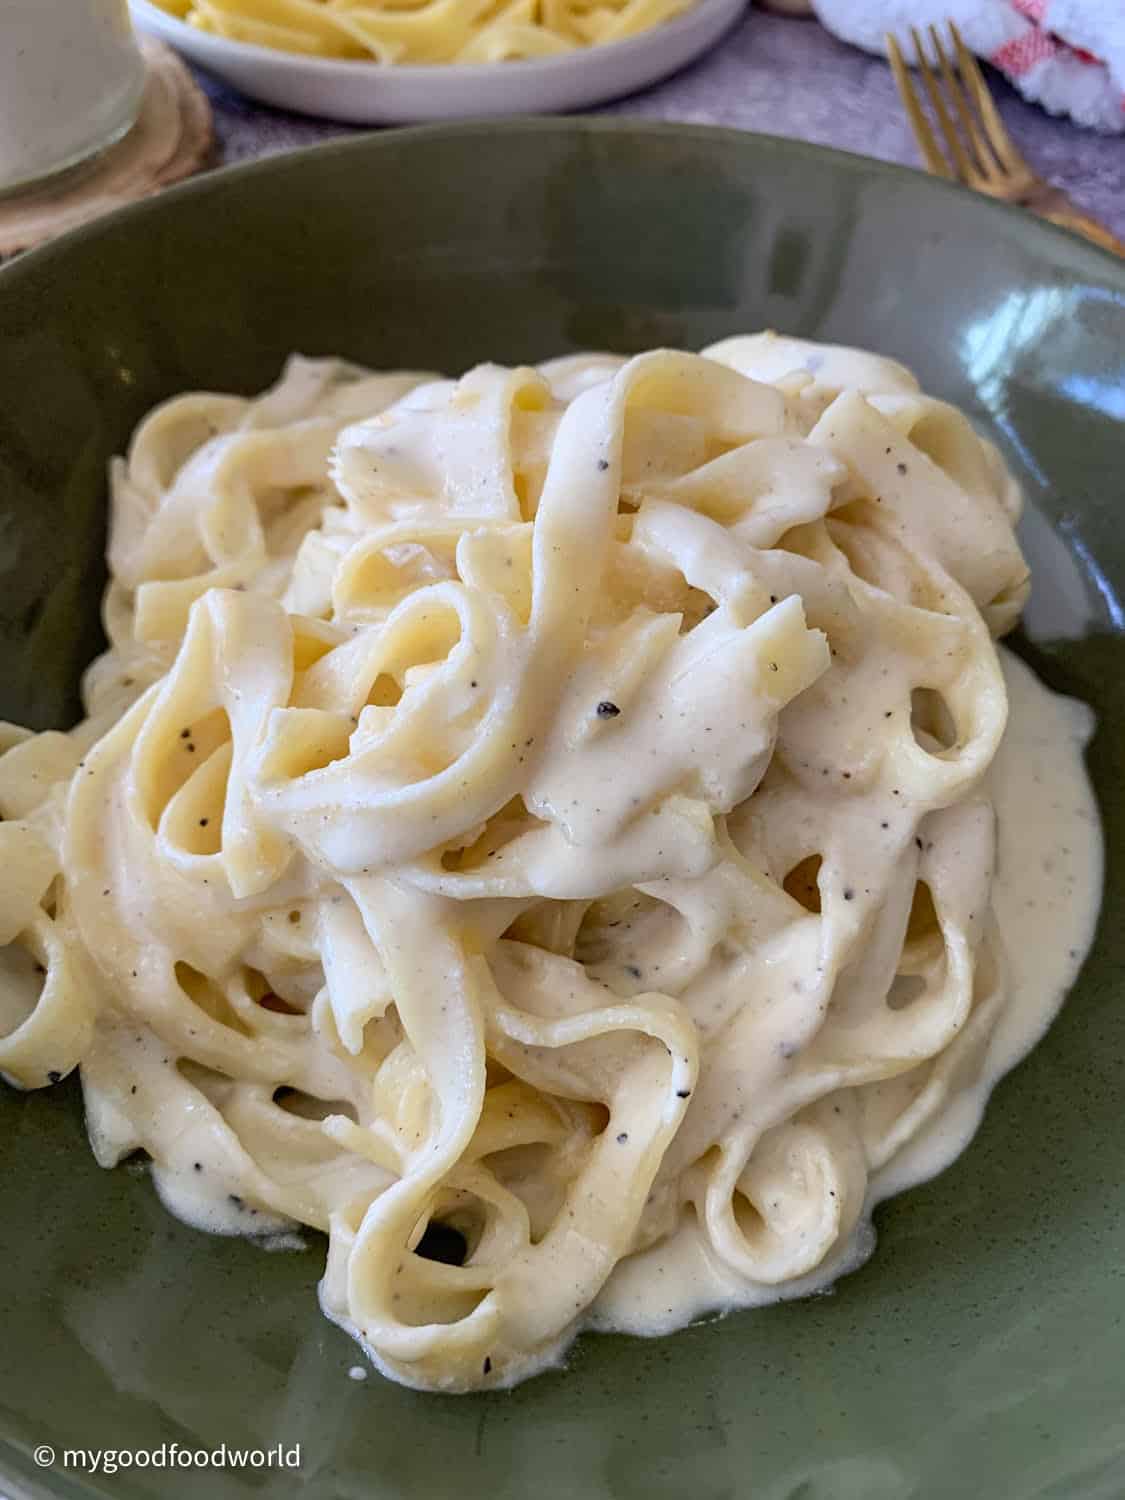 Some fettucine pasta thickly coated in a white colored creamy sauce with seasoning is plated in a green round bowl.